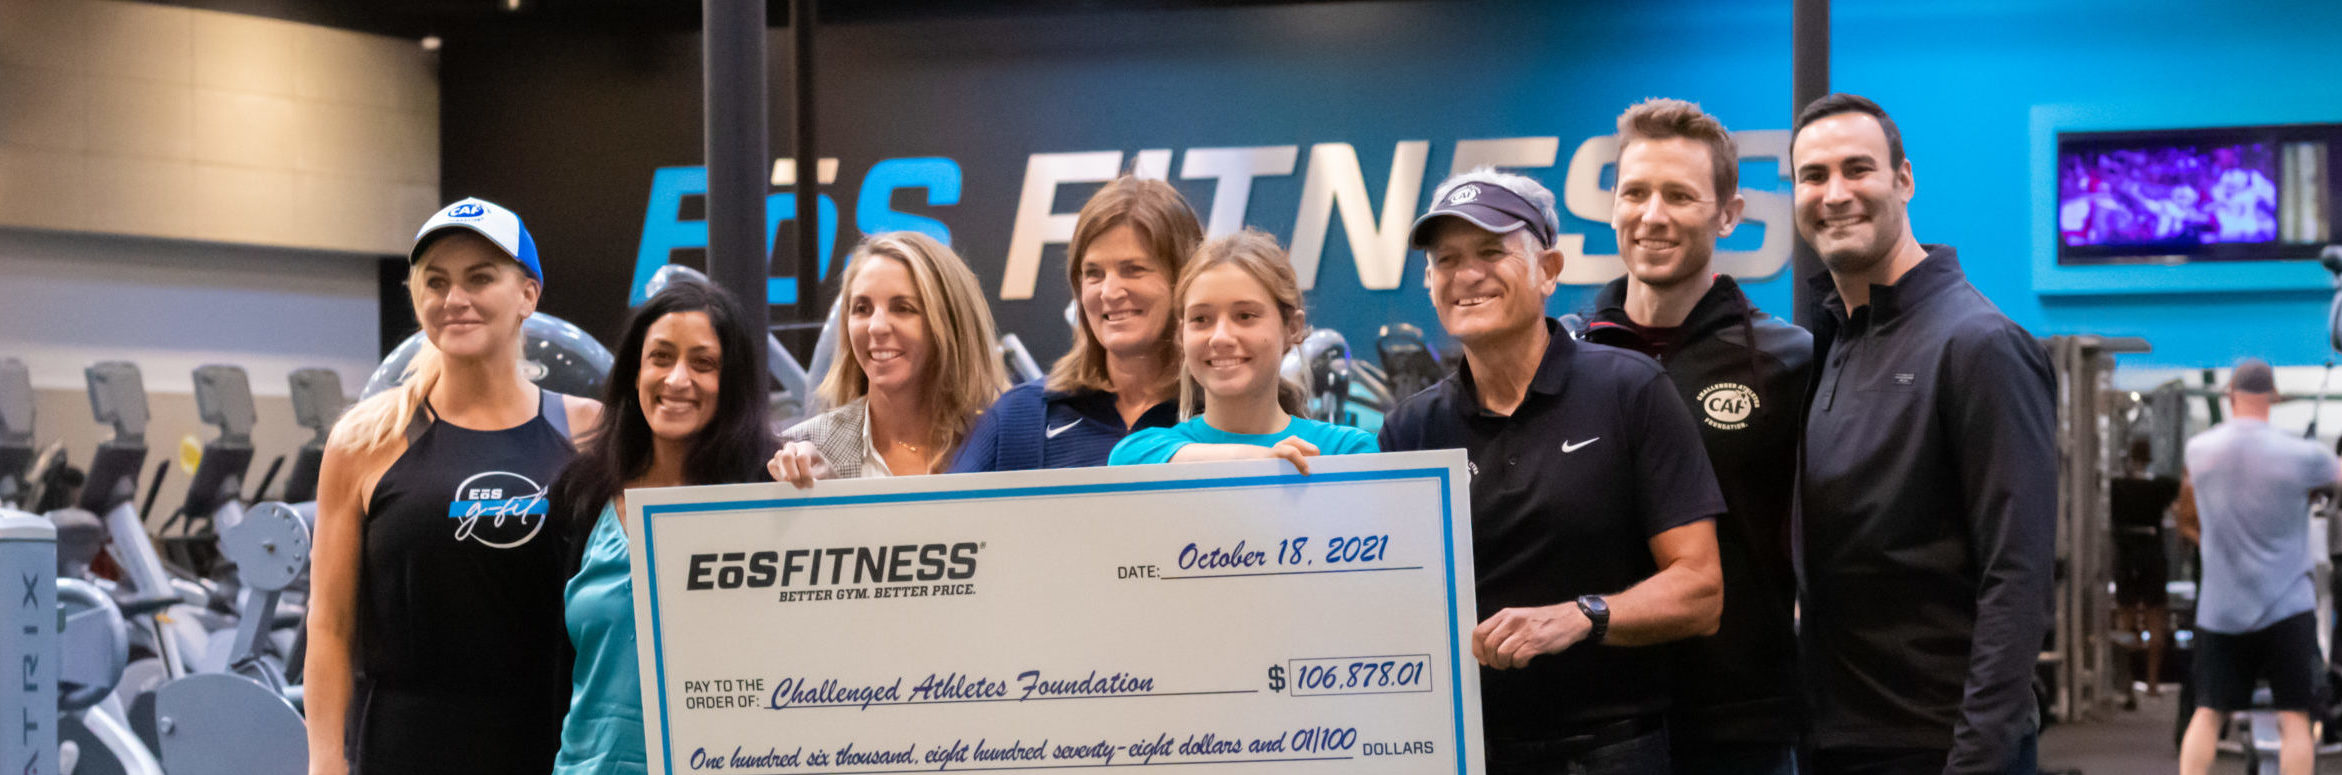 EōS Fitness Raises Over $100,000 for Challenged Athletes Foundation